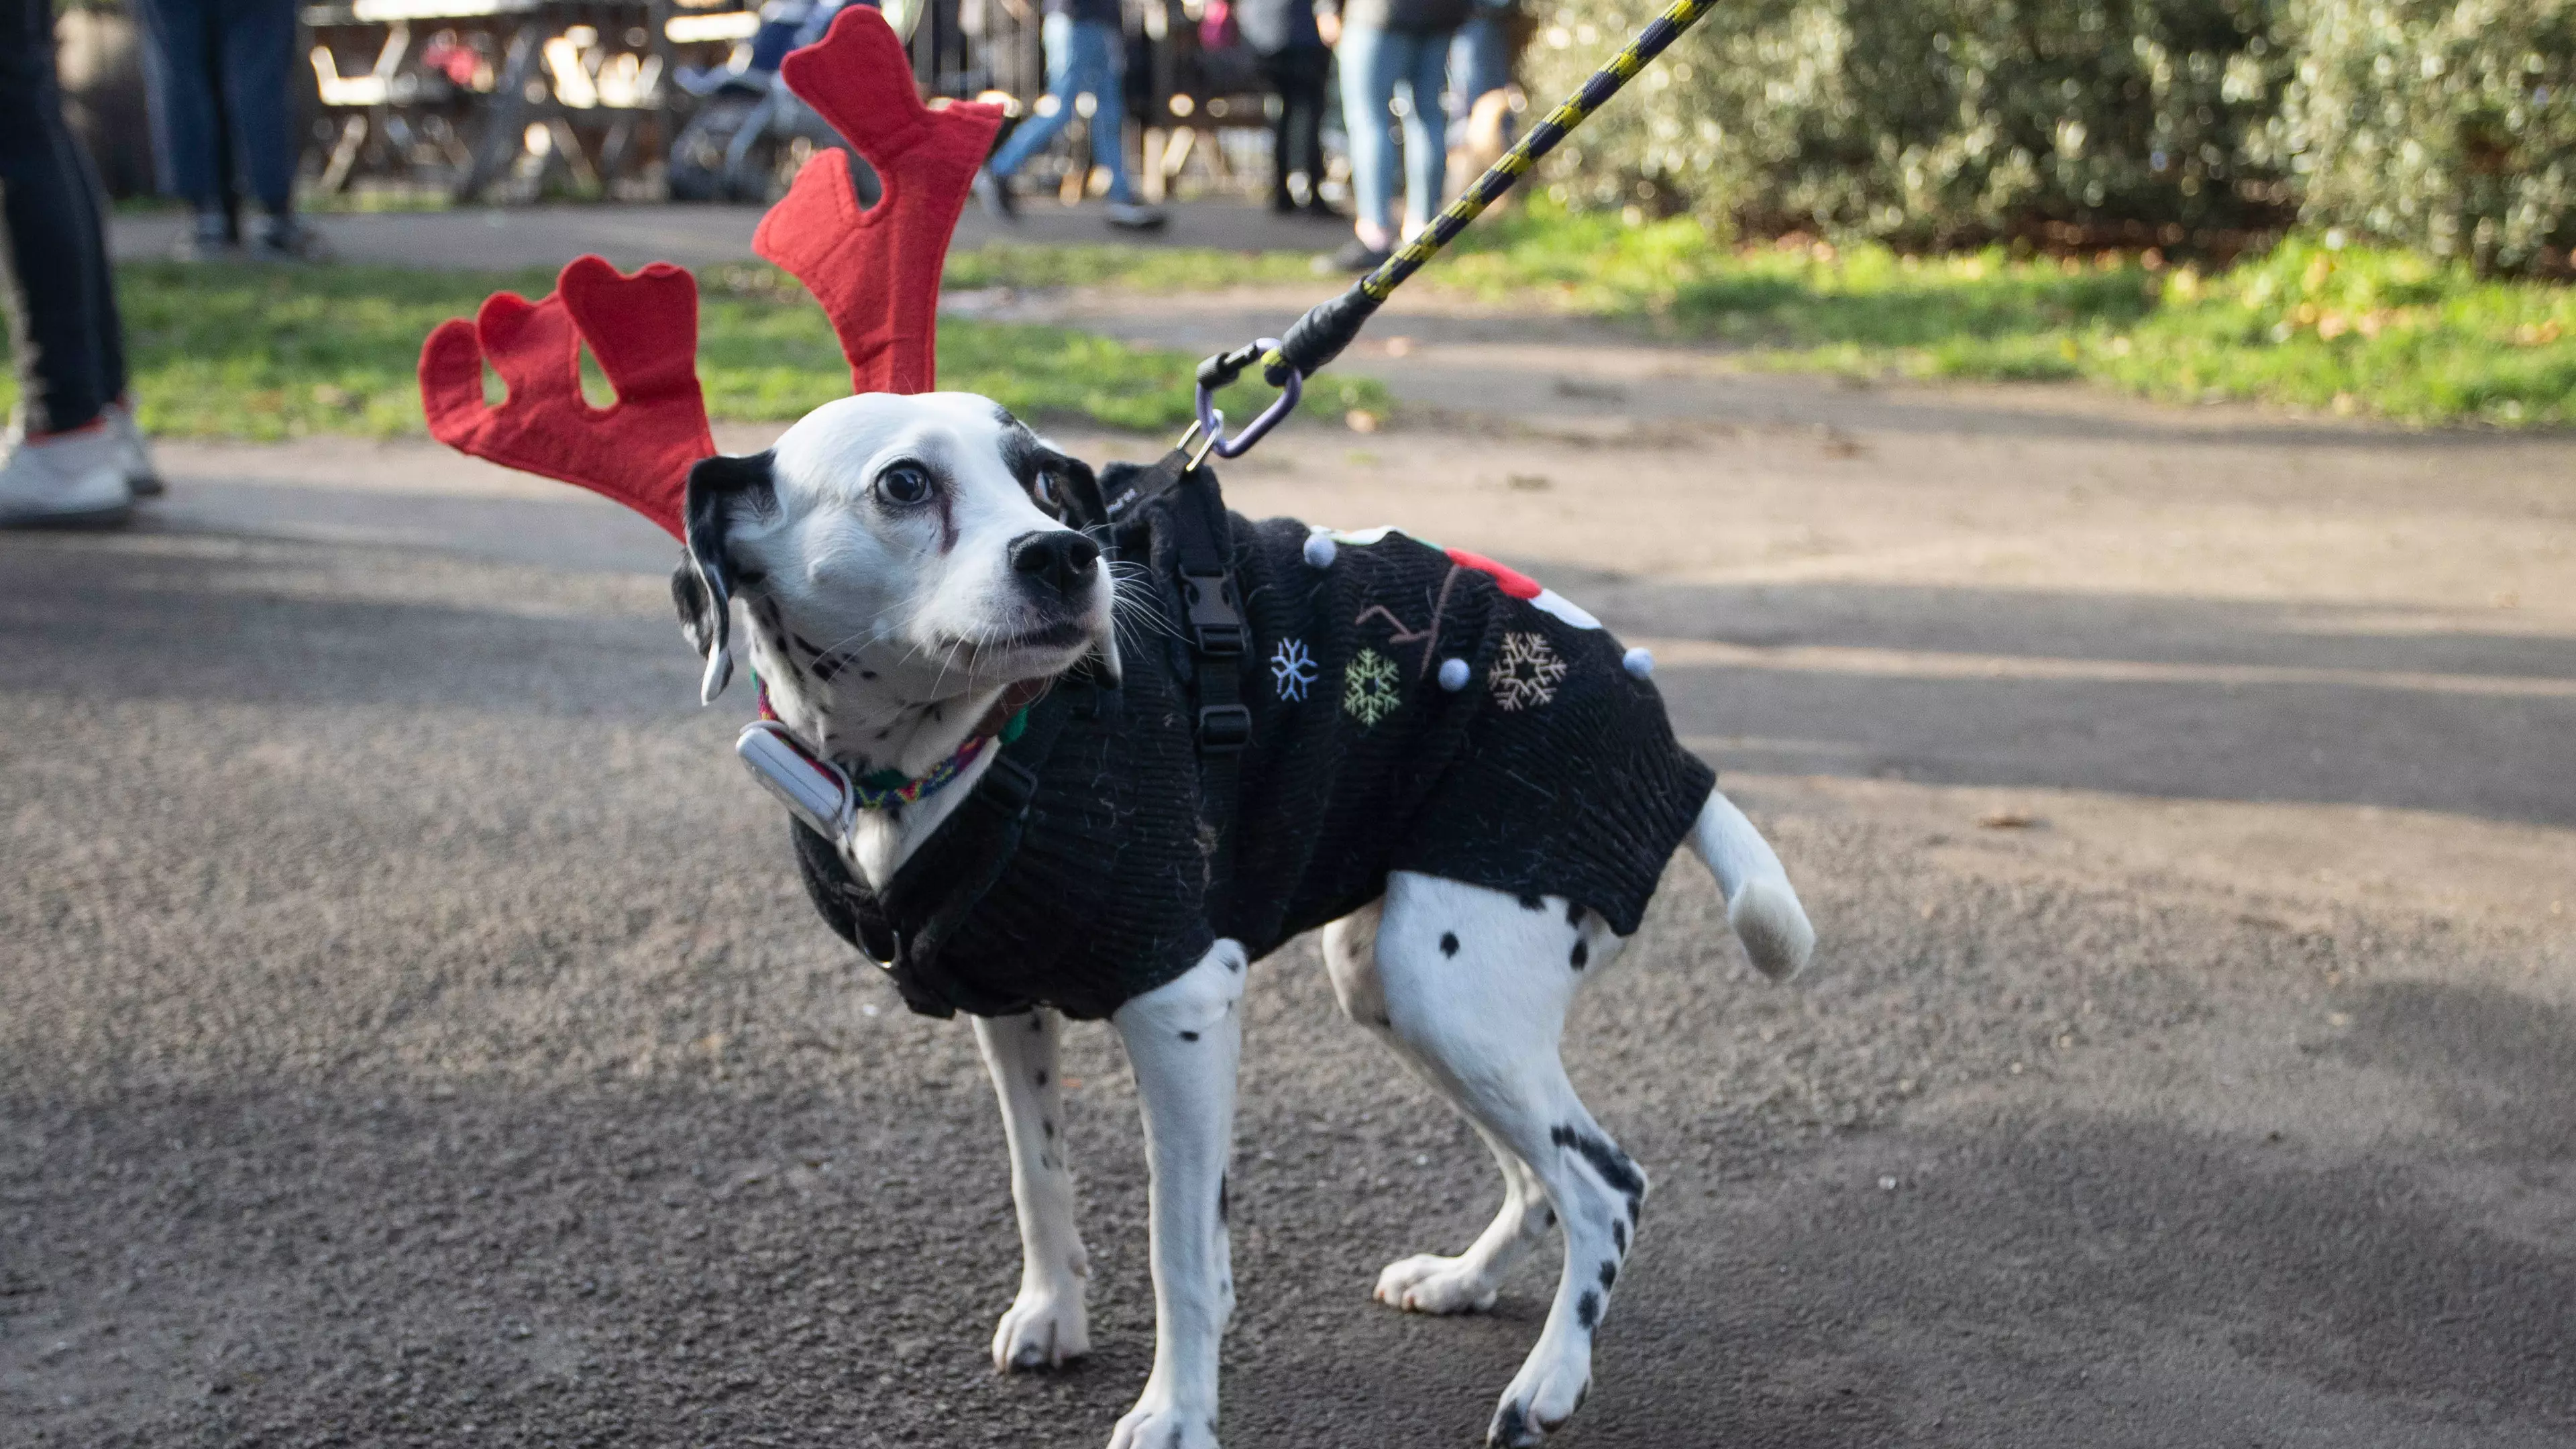 The World Record Attempt For Biggest Gathering Of Dogs In Christmas Jumpers Has Been Smashed